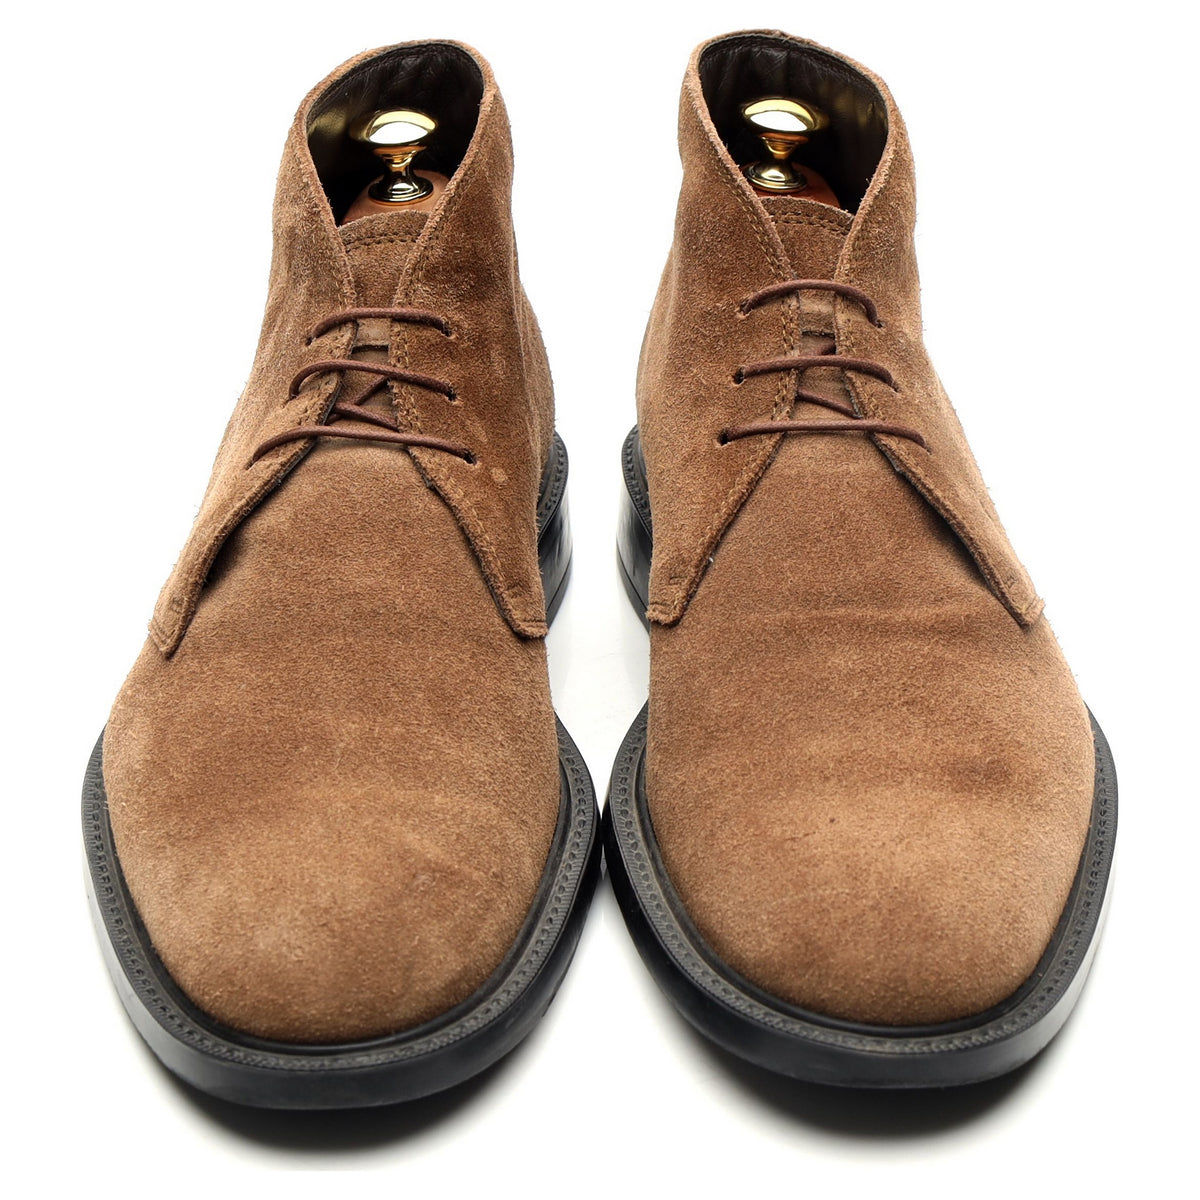 Brown Suede Chukka Boots UK 9.5